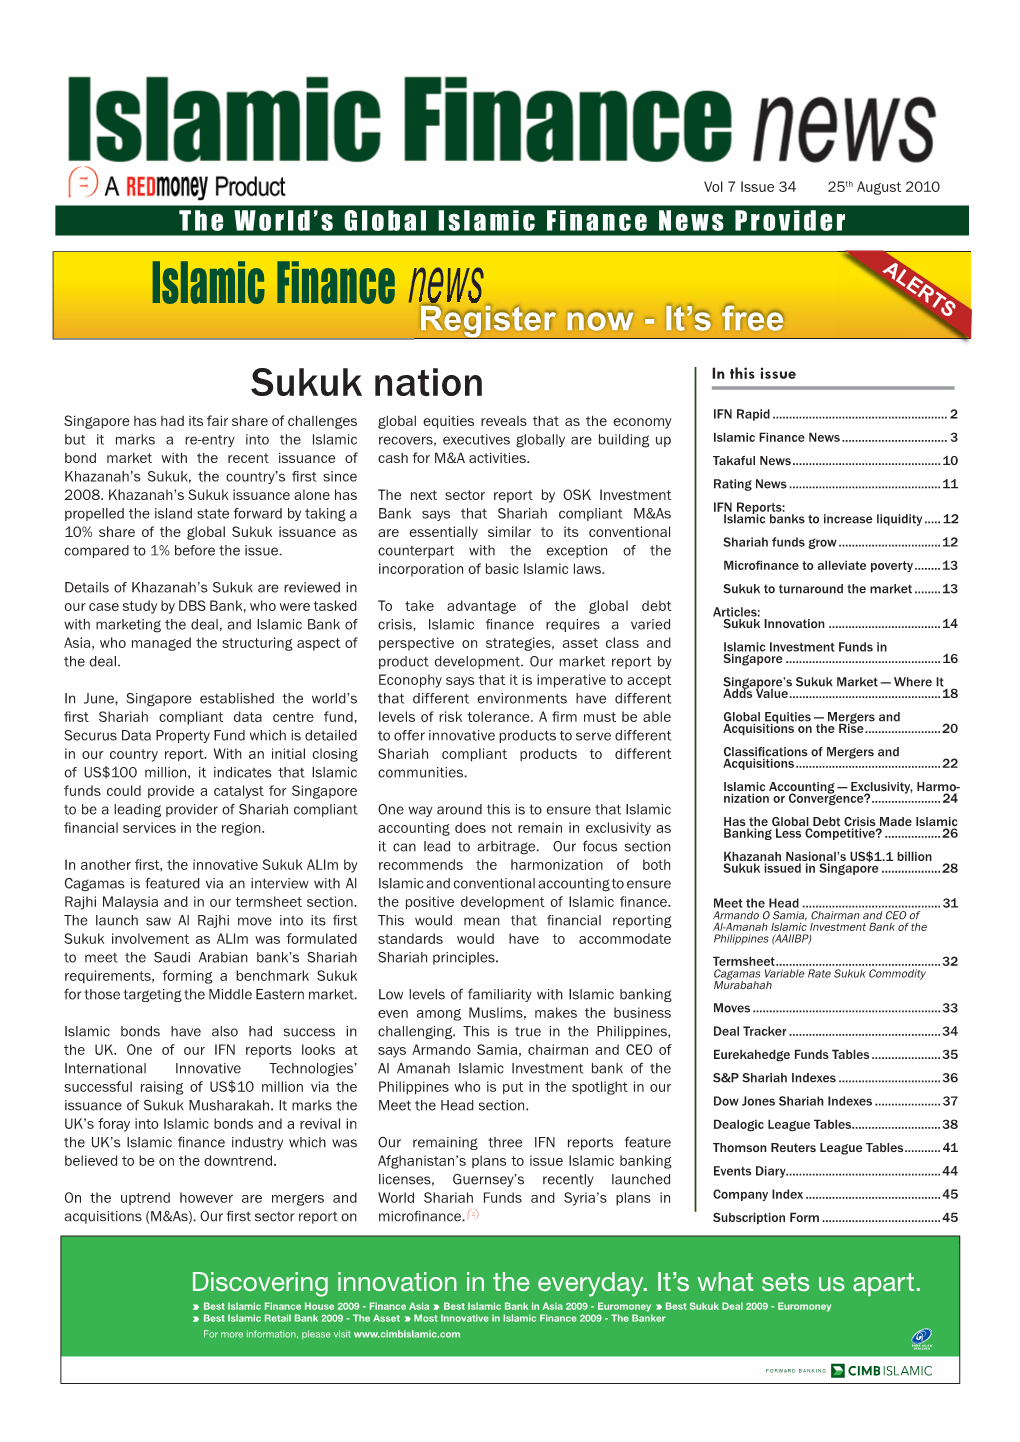 Sukuk Nation in This Issue Singapore Has Had Its Fair Share of Challenges Global Equities Reveals That As the Economy IFN Rapid